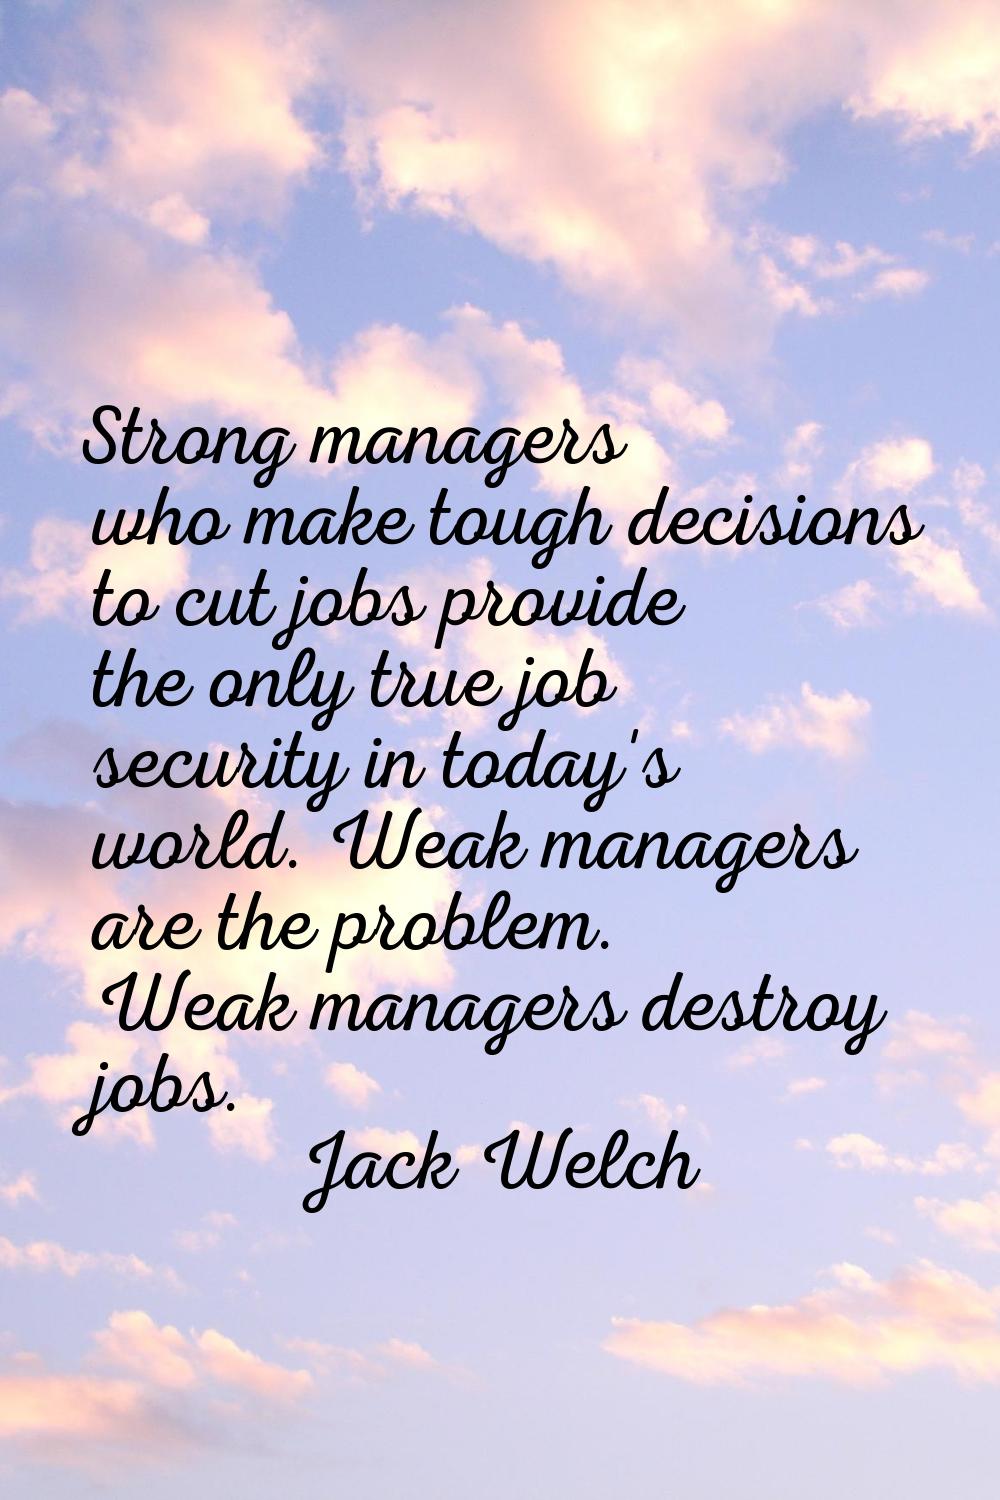 Strong managers who make tough decisions to cut jobs provide the only true job security in today's 